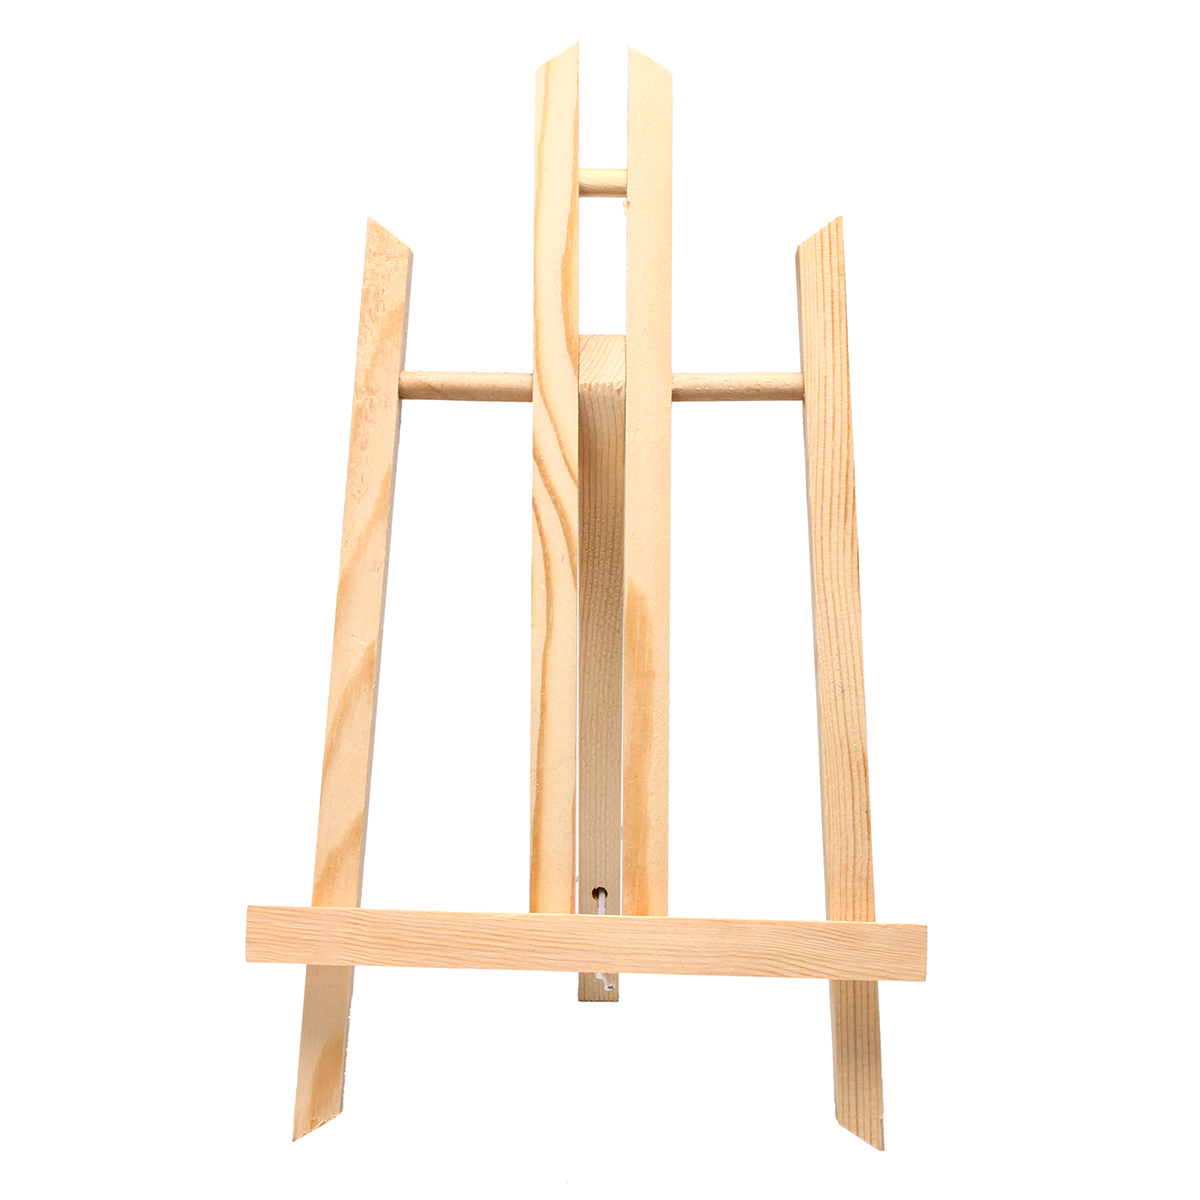 Durable-Wood-Wooden-Easels-Display-Tripod-Art-Artist-Painting-Stand-Paint-Rack-1368883-4